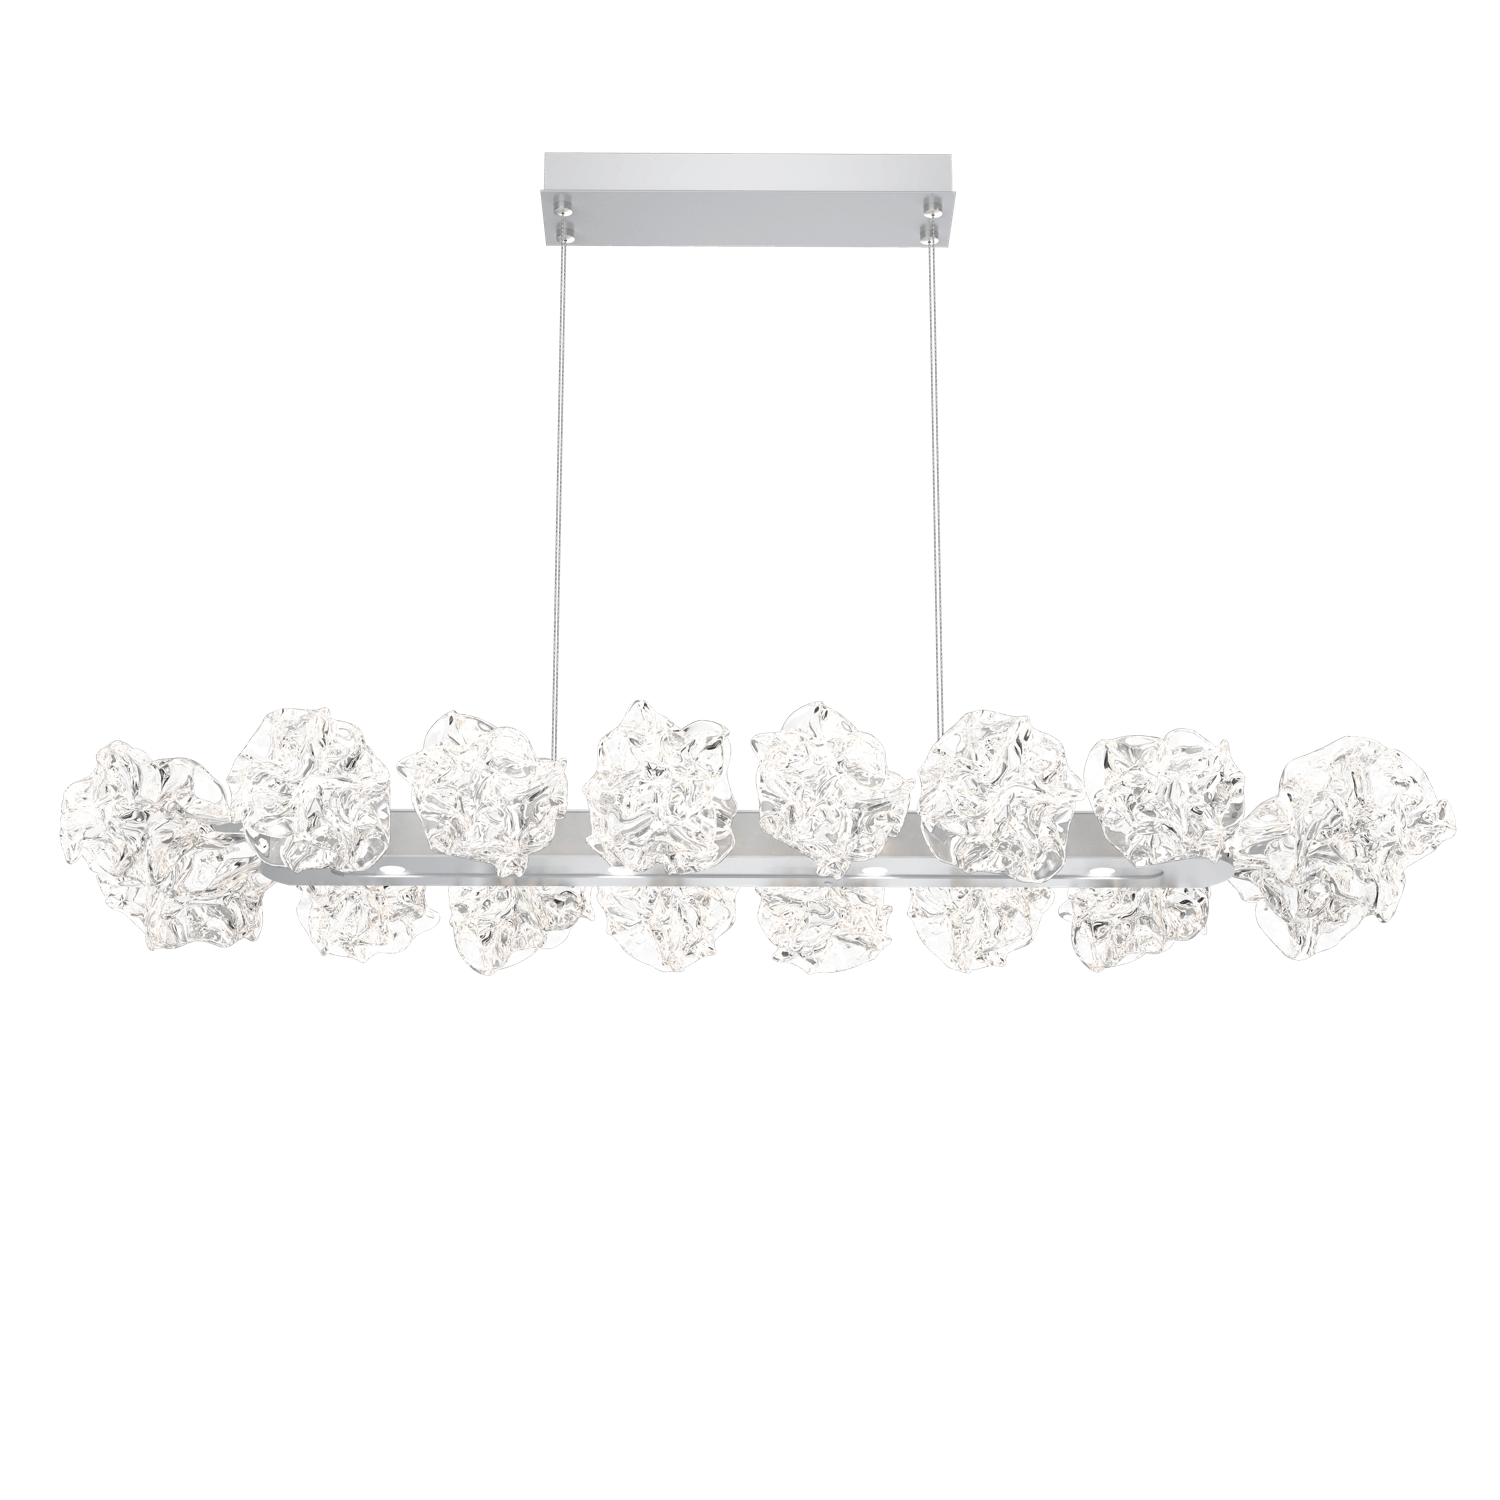 PLB0059-48-CS-Hammerton-Studio-Blossom-48-inch-linear-chandelier-with-classic-silver-finish-and-clear-handblown-crystal-glass-shades-and-LED-lamping